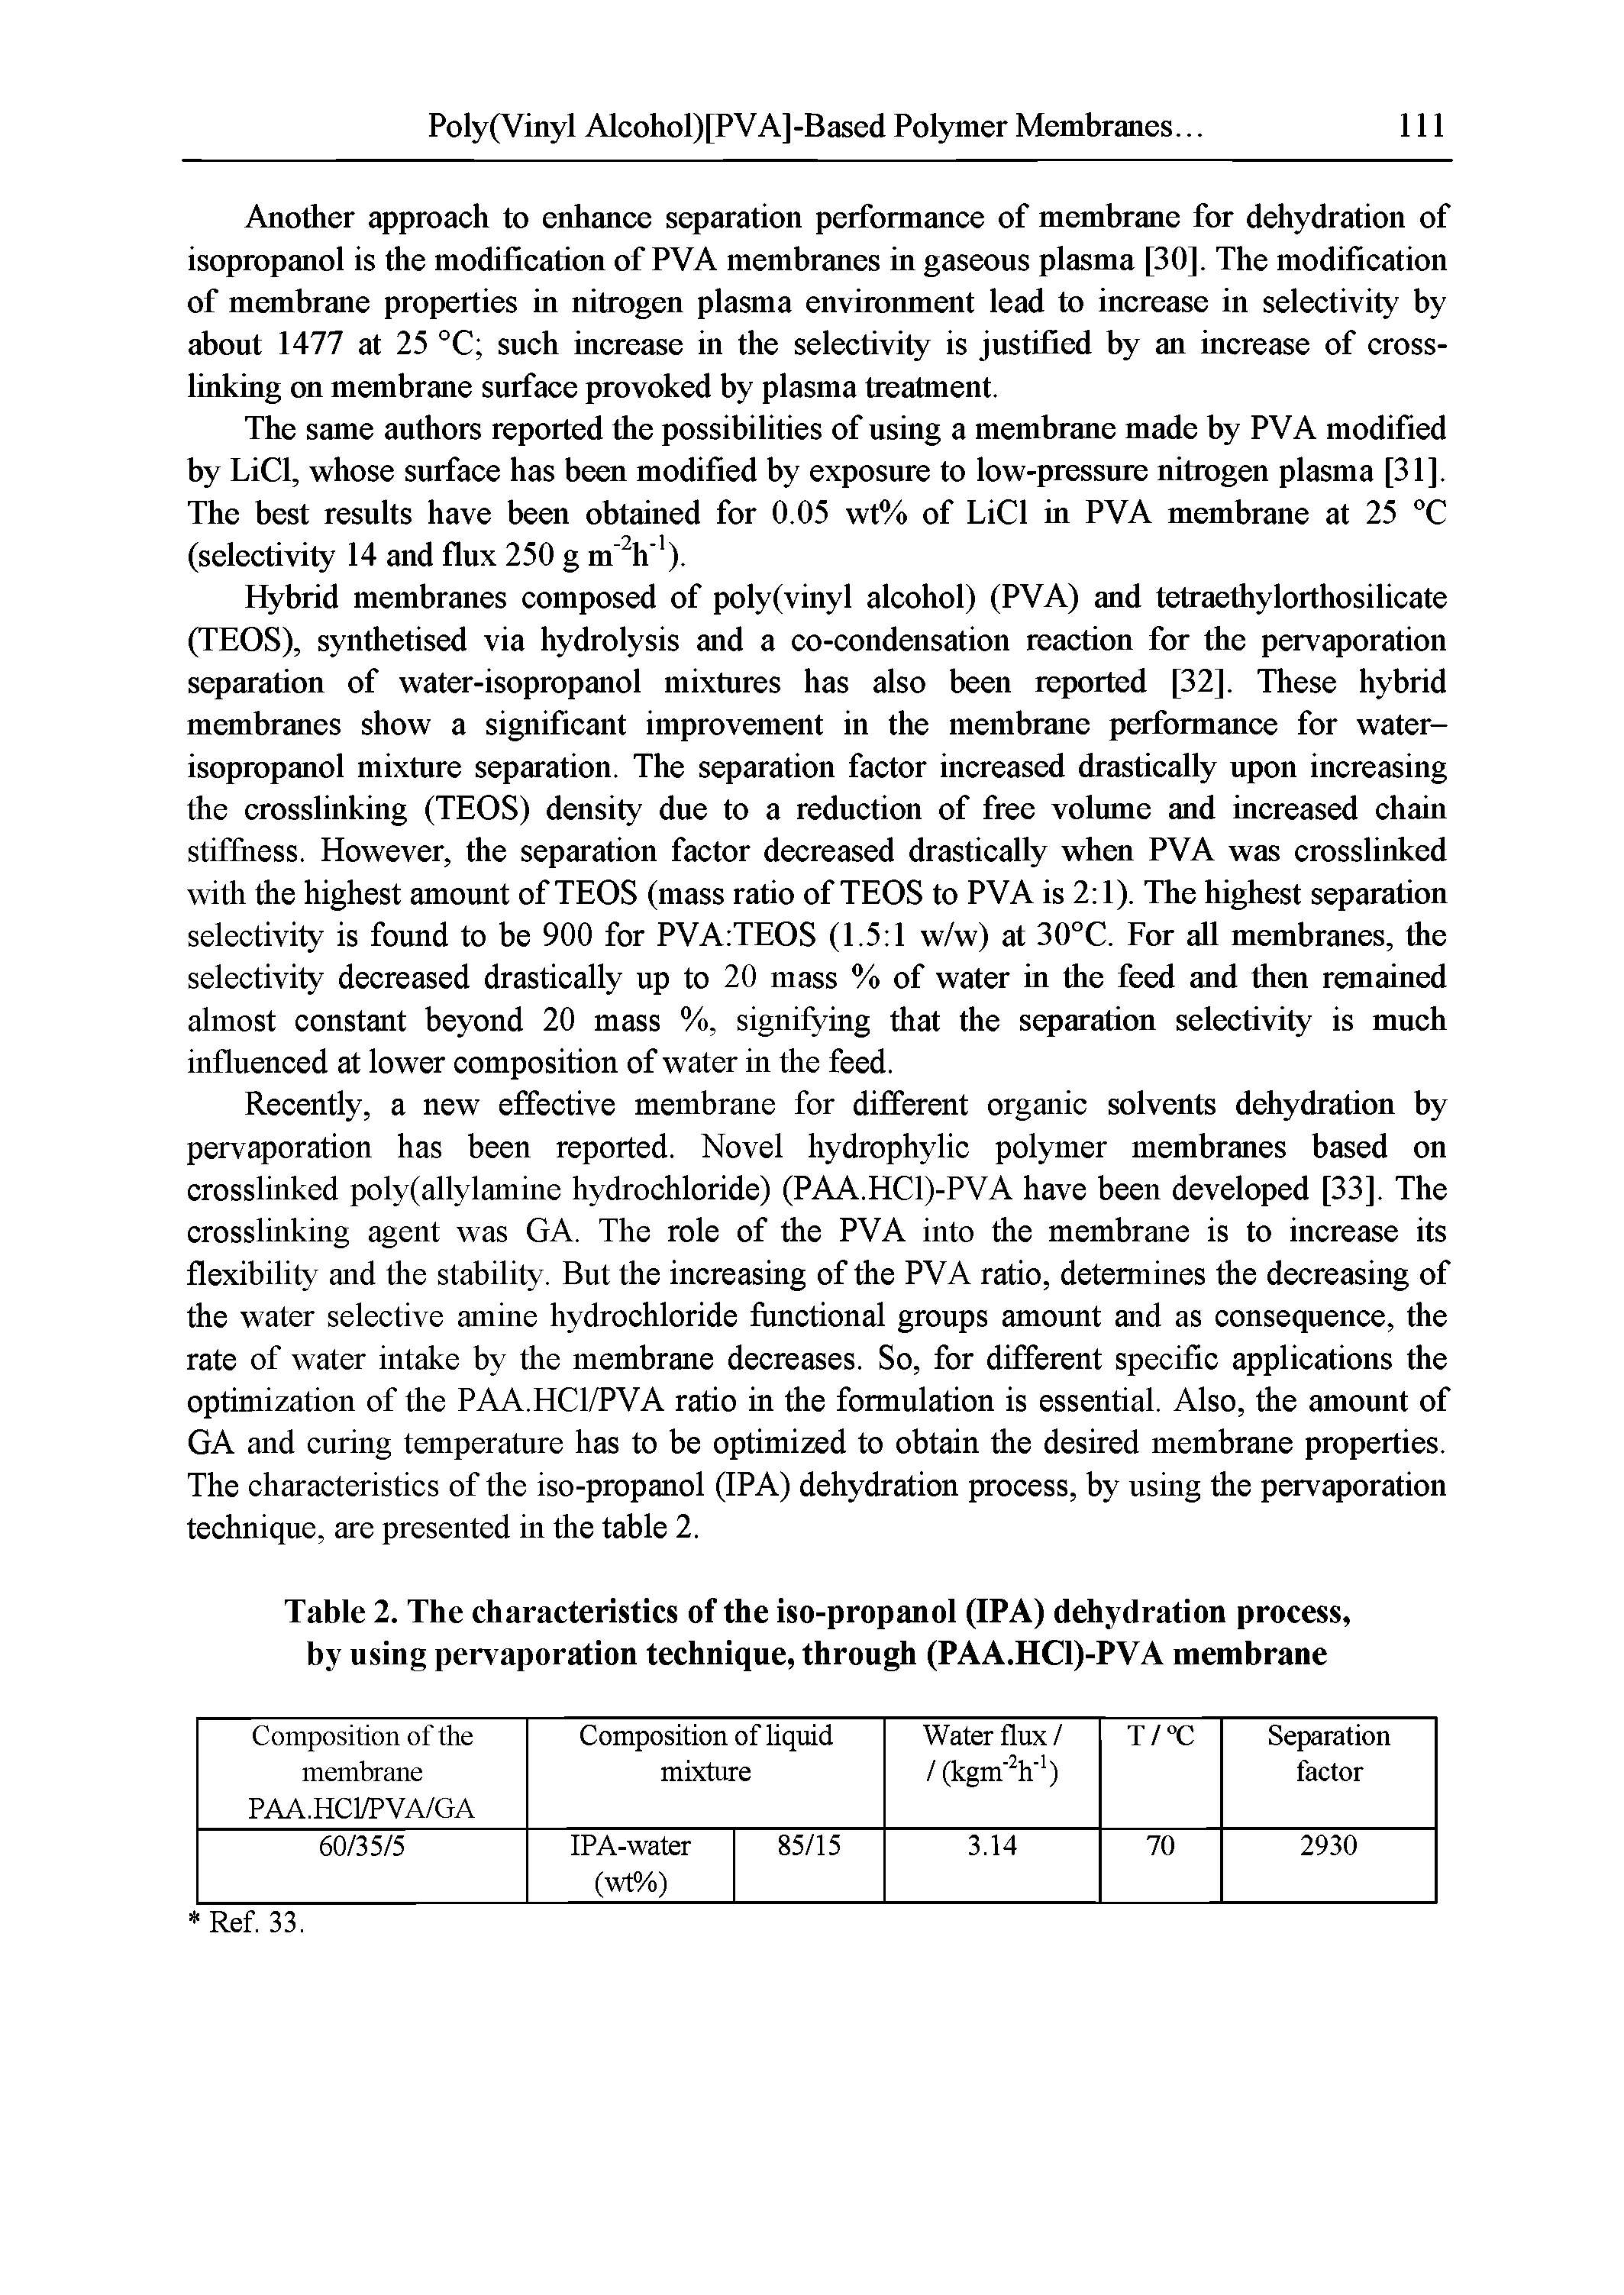 Table 2. The characteristics of the iso-propanol (IPA) dehydration process, by using pervaporation technique, through (PAA.HCl)-PVA membrane...